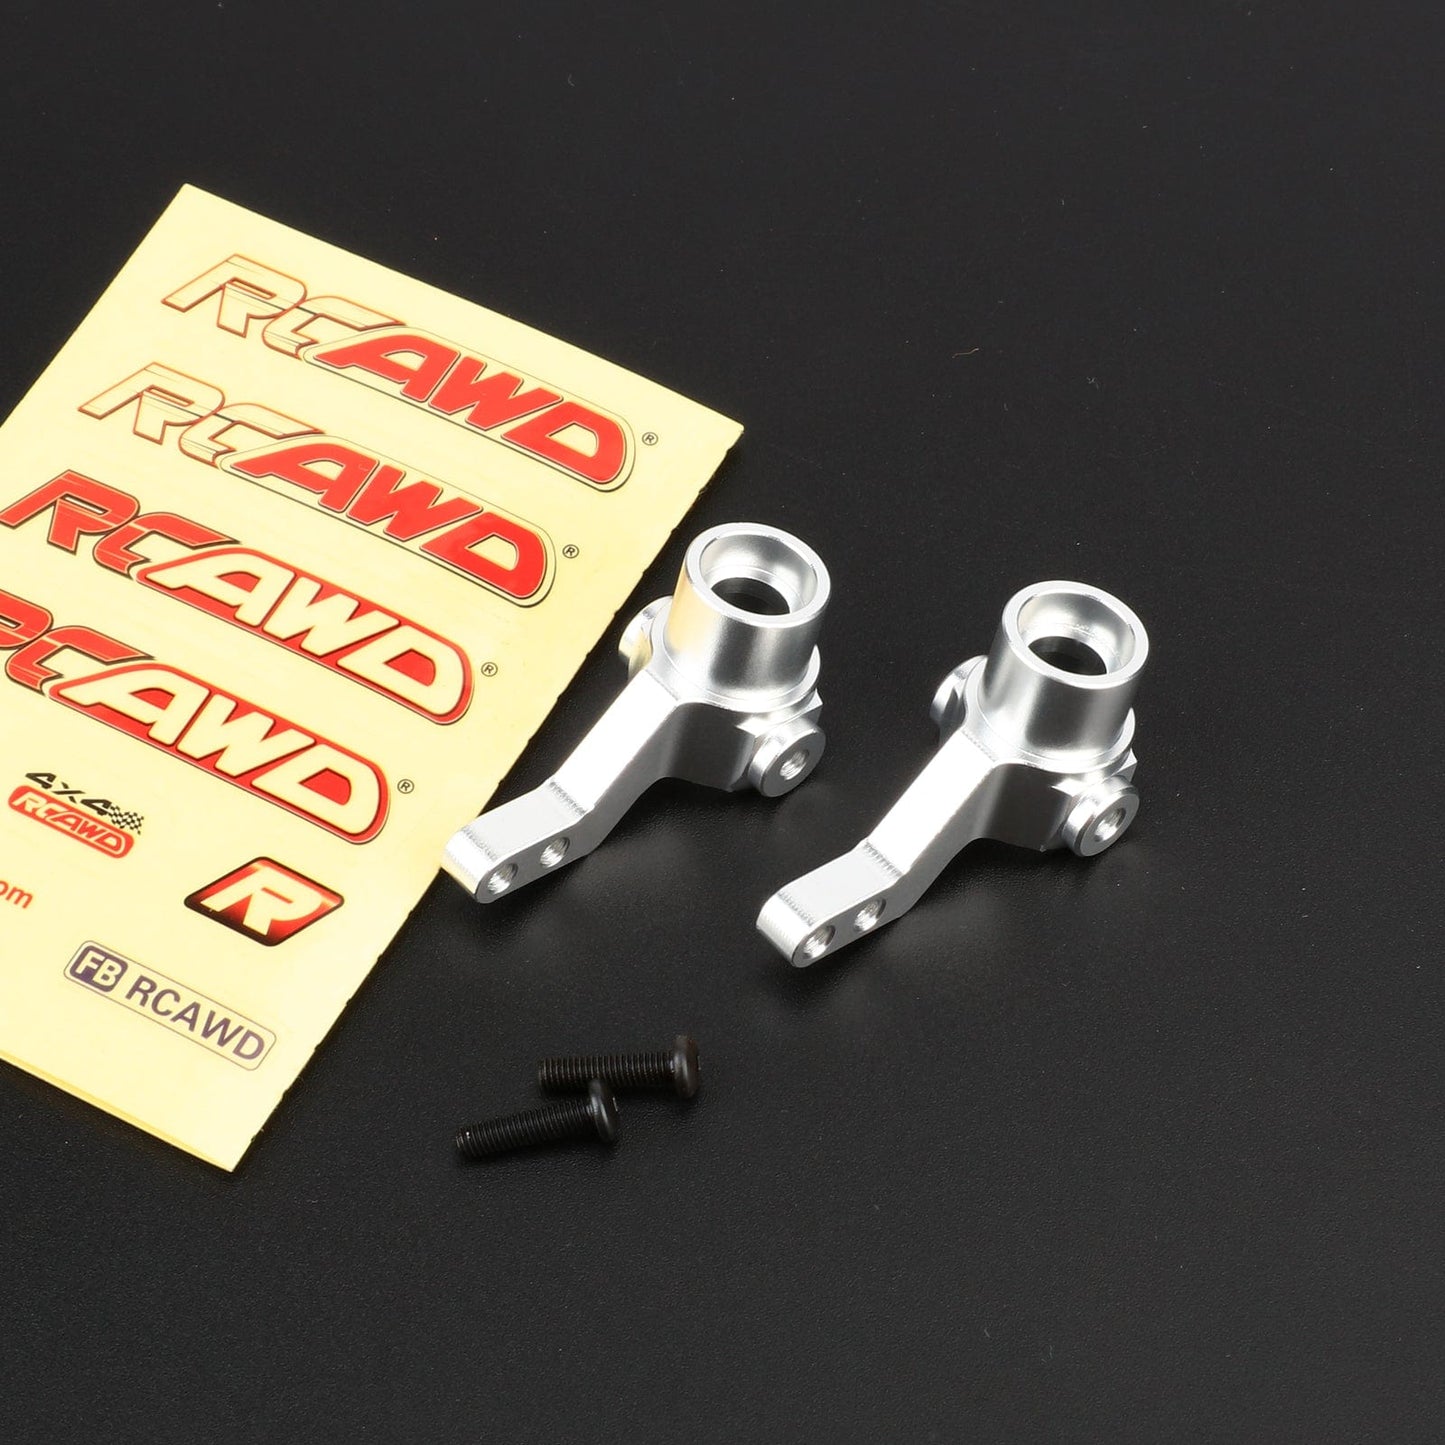 RCAWD 1/8 CEN Racing Upgrades Steering Caster Blocks CM02002A - RCAWD